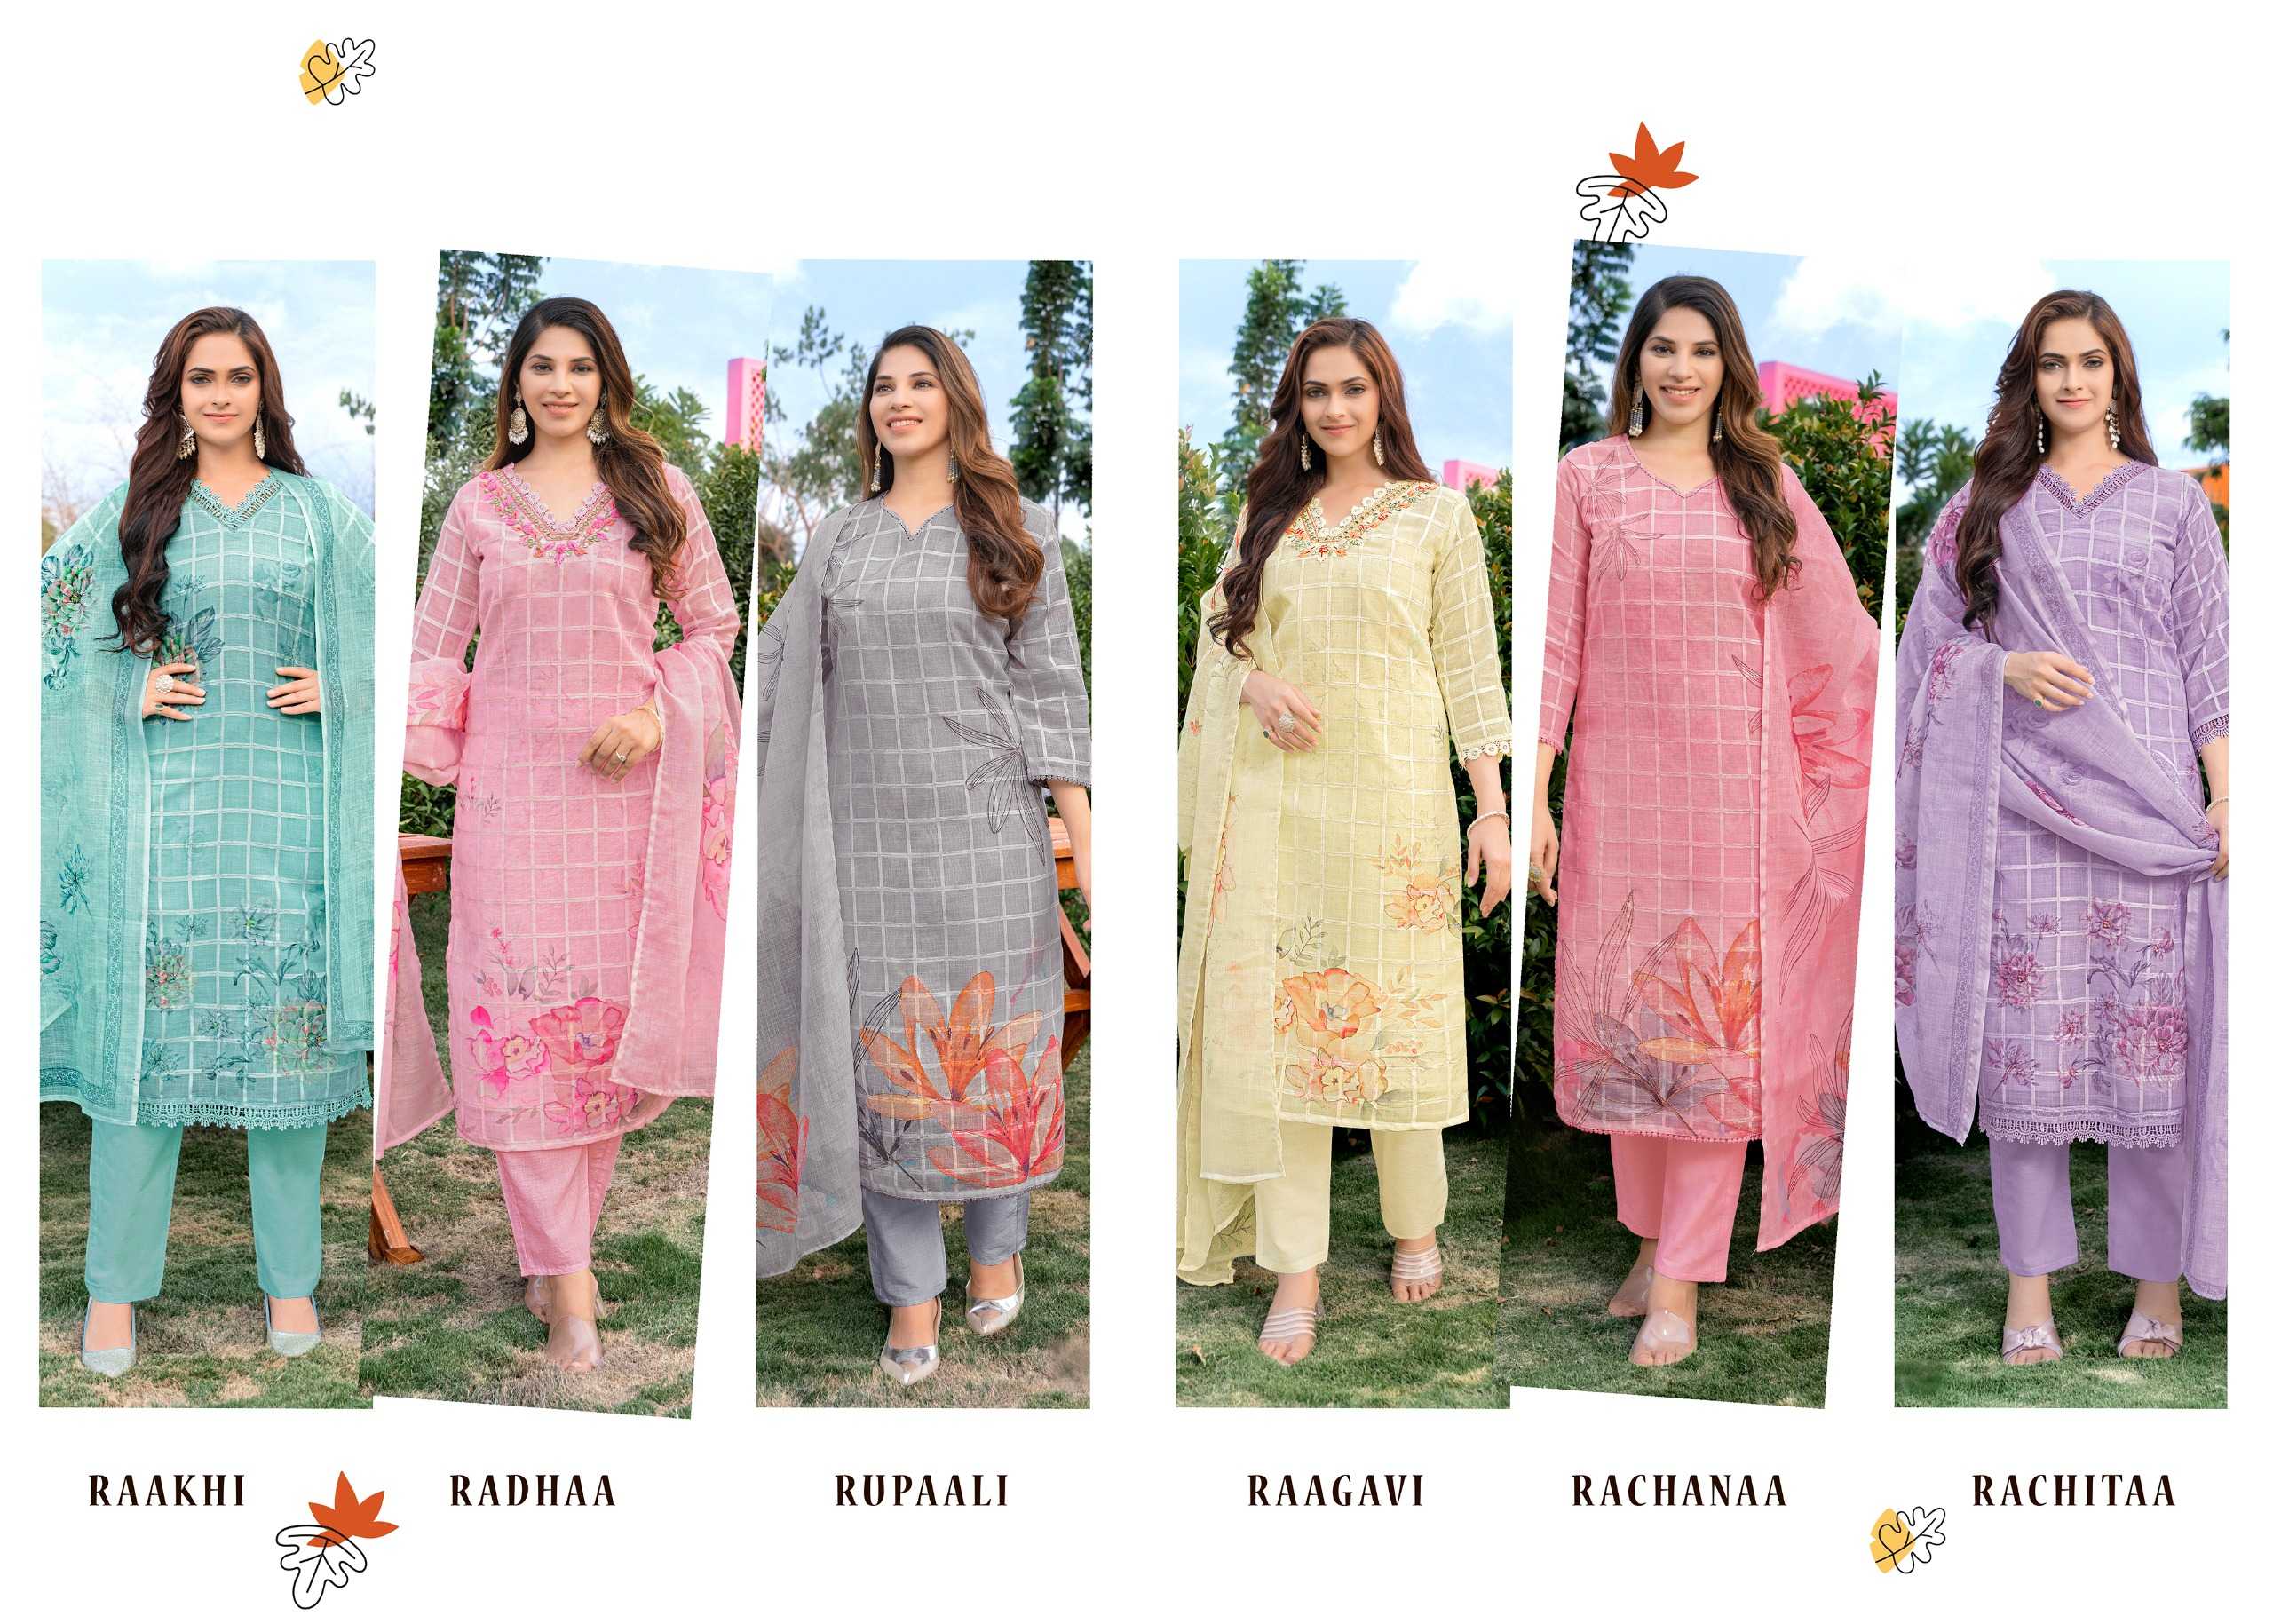 SHRUTI SUIT SHADES OF SUMMER FULLY STITCH PRETTY LOOK SALWAR SUIT